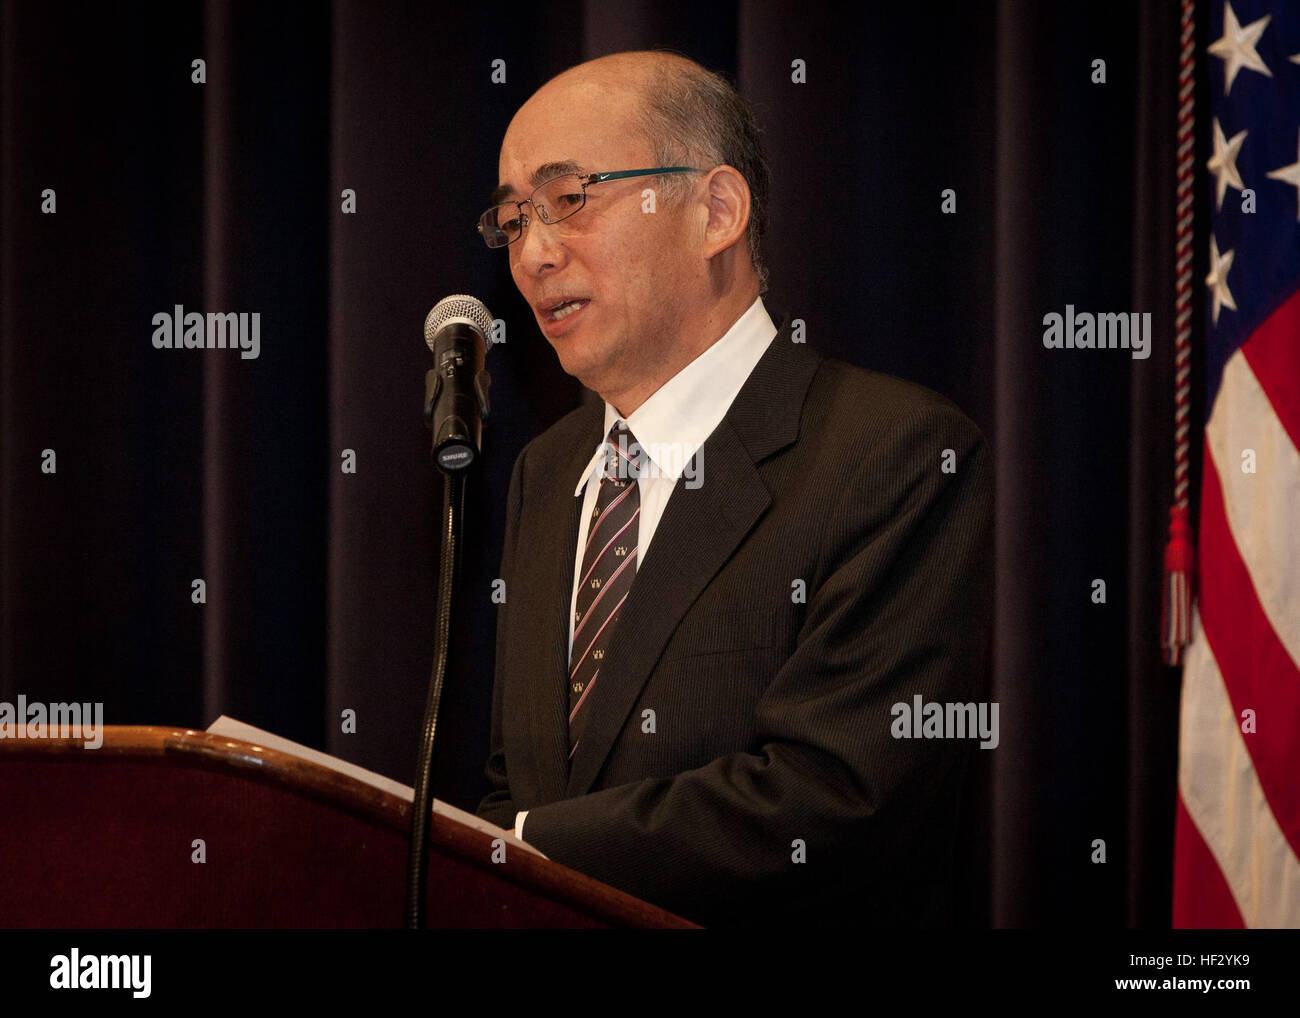 Japanese Ambassador for the United States, Kenishiro Sasae, speaks during an Iwo Jima reunion at Marine Barracks Washington, D.C., Feb. 19, 2015. The event commemorated the 70th Anniversary of the Battle of Iwo Jima with veterans, families, dignitaries and service members. (U.S. Marine Corps photo by Cpl. Lauren L. Whitney/Released) 70th Iwo Jima Reunion 150219-M-GZ082-060 Stock Photo